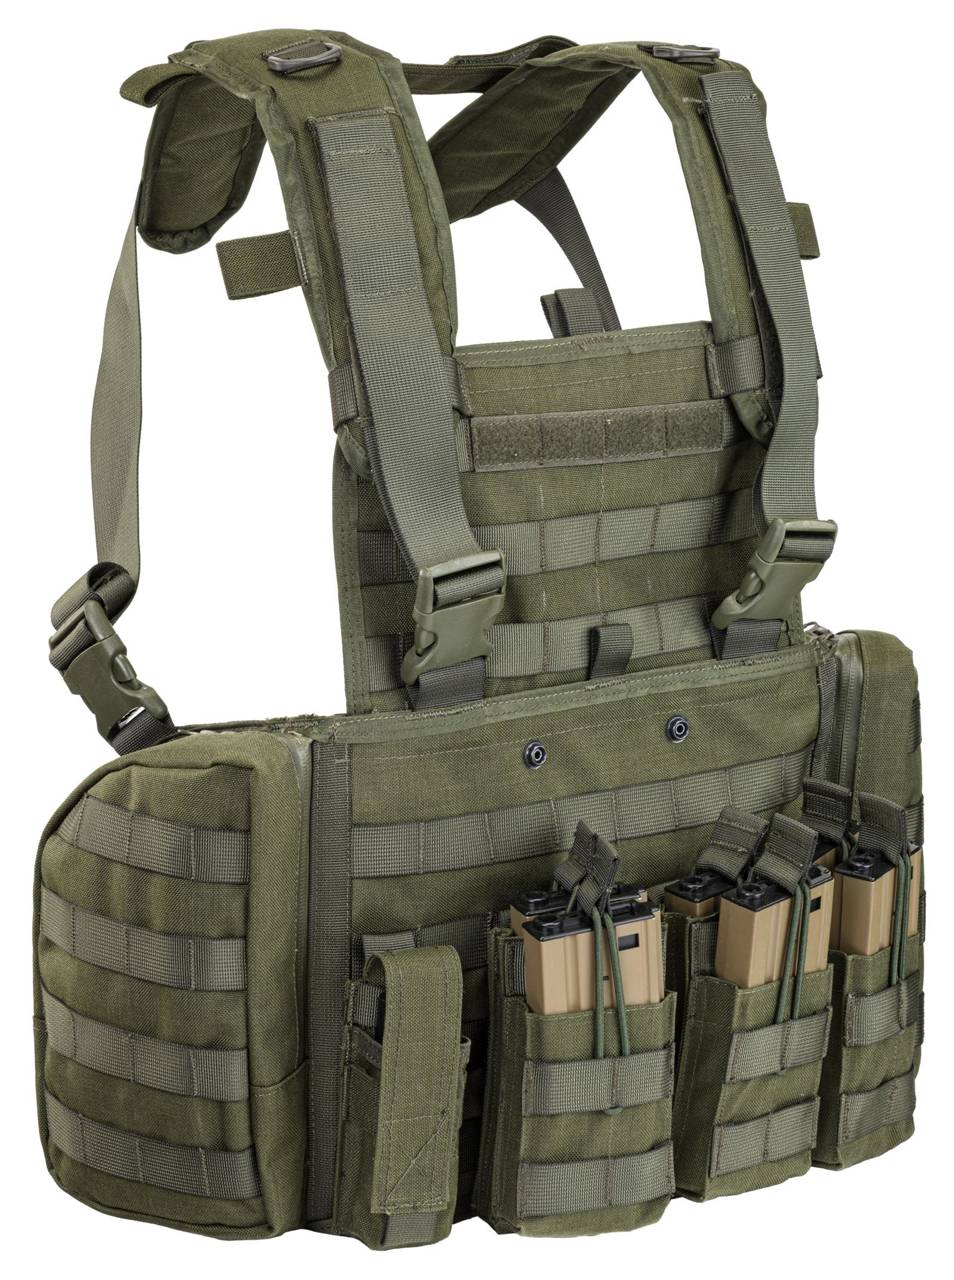 TACTICAL CHEST RIG - 